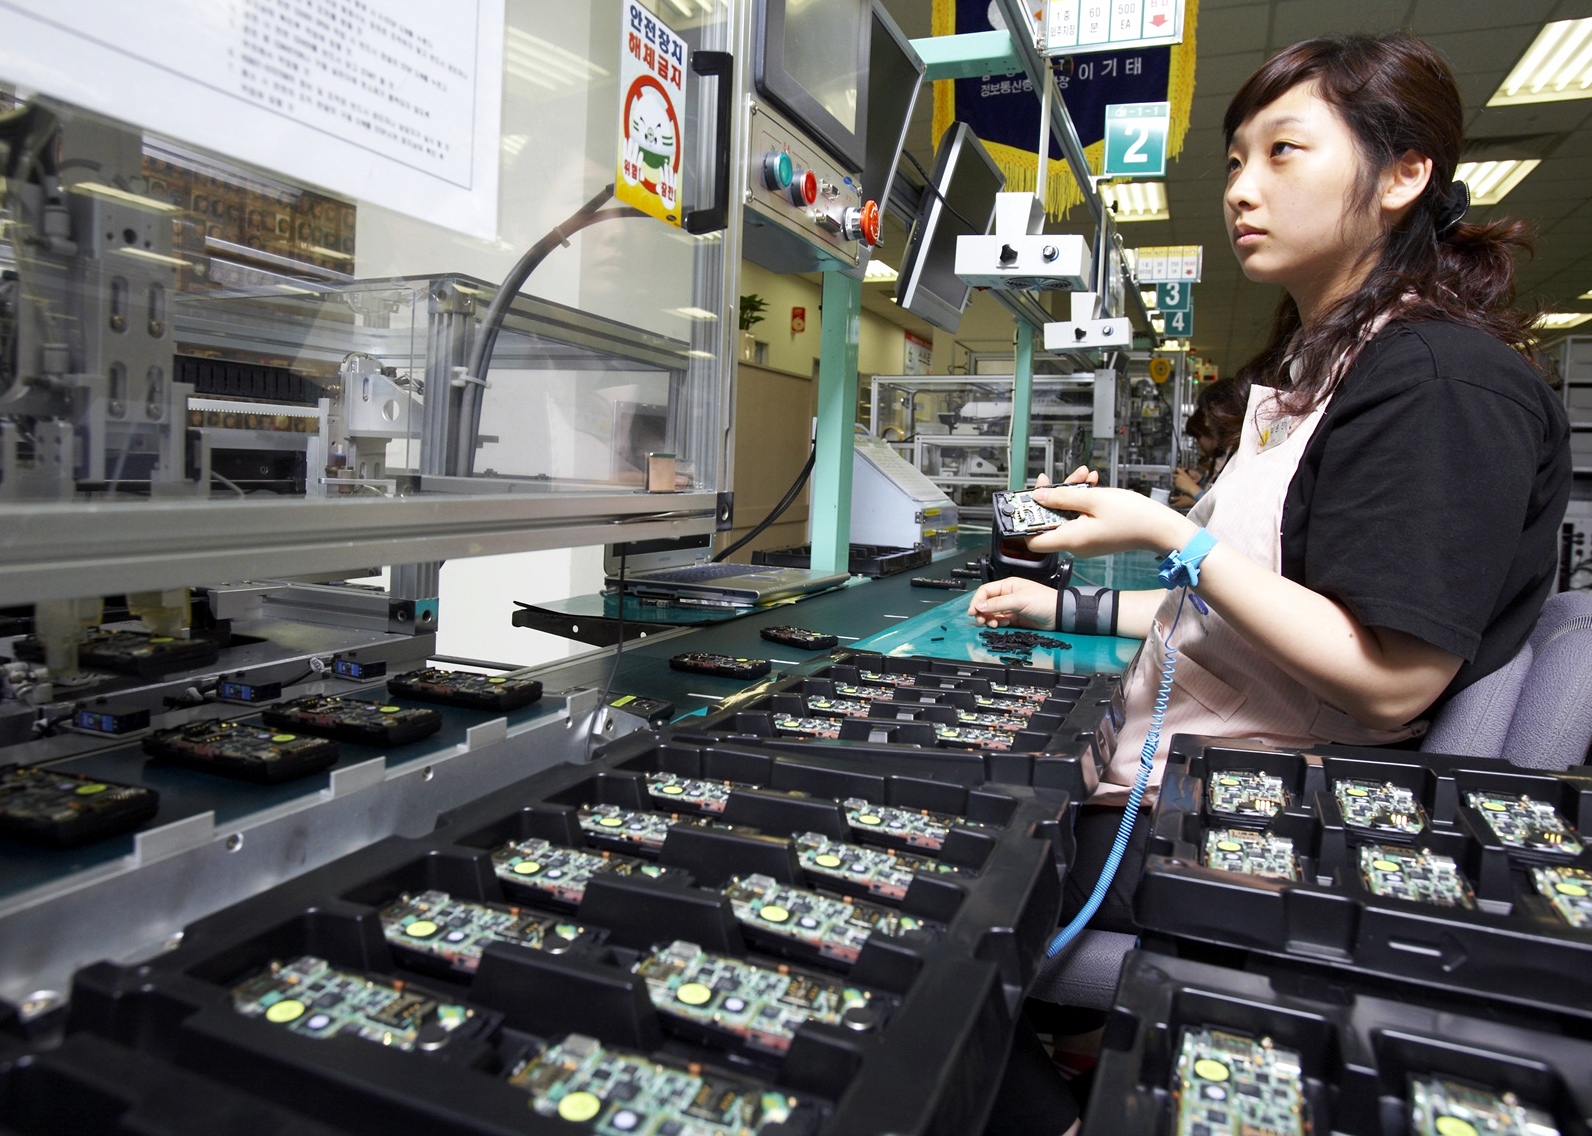 A woman works at a Samsung Electronics' mobile phone assembly line in South Korea. Samsung has been ordered to pay compensation to the family of a worker who died of leukaemia at the age of 29. Photo: Reuters